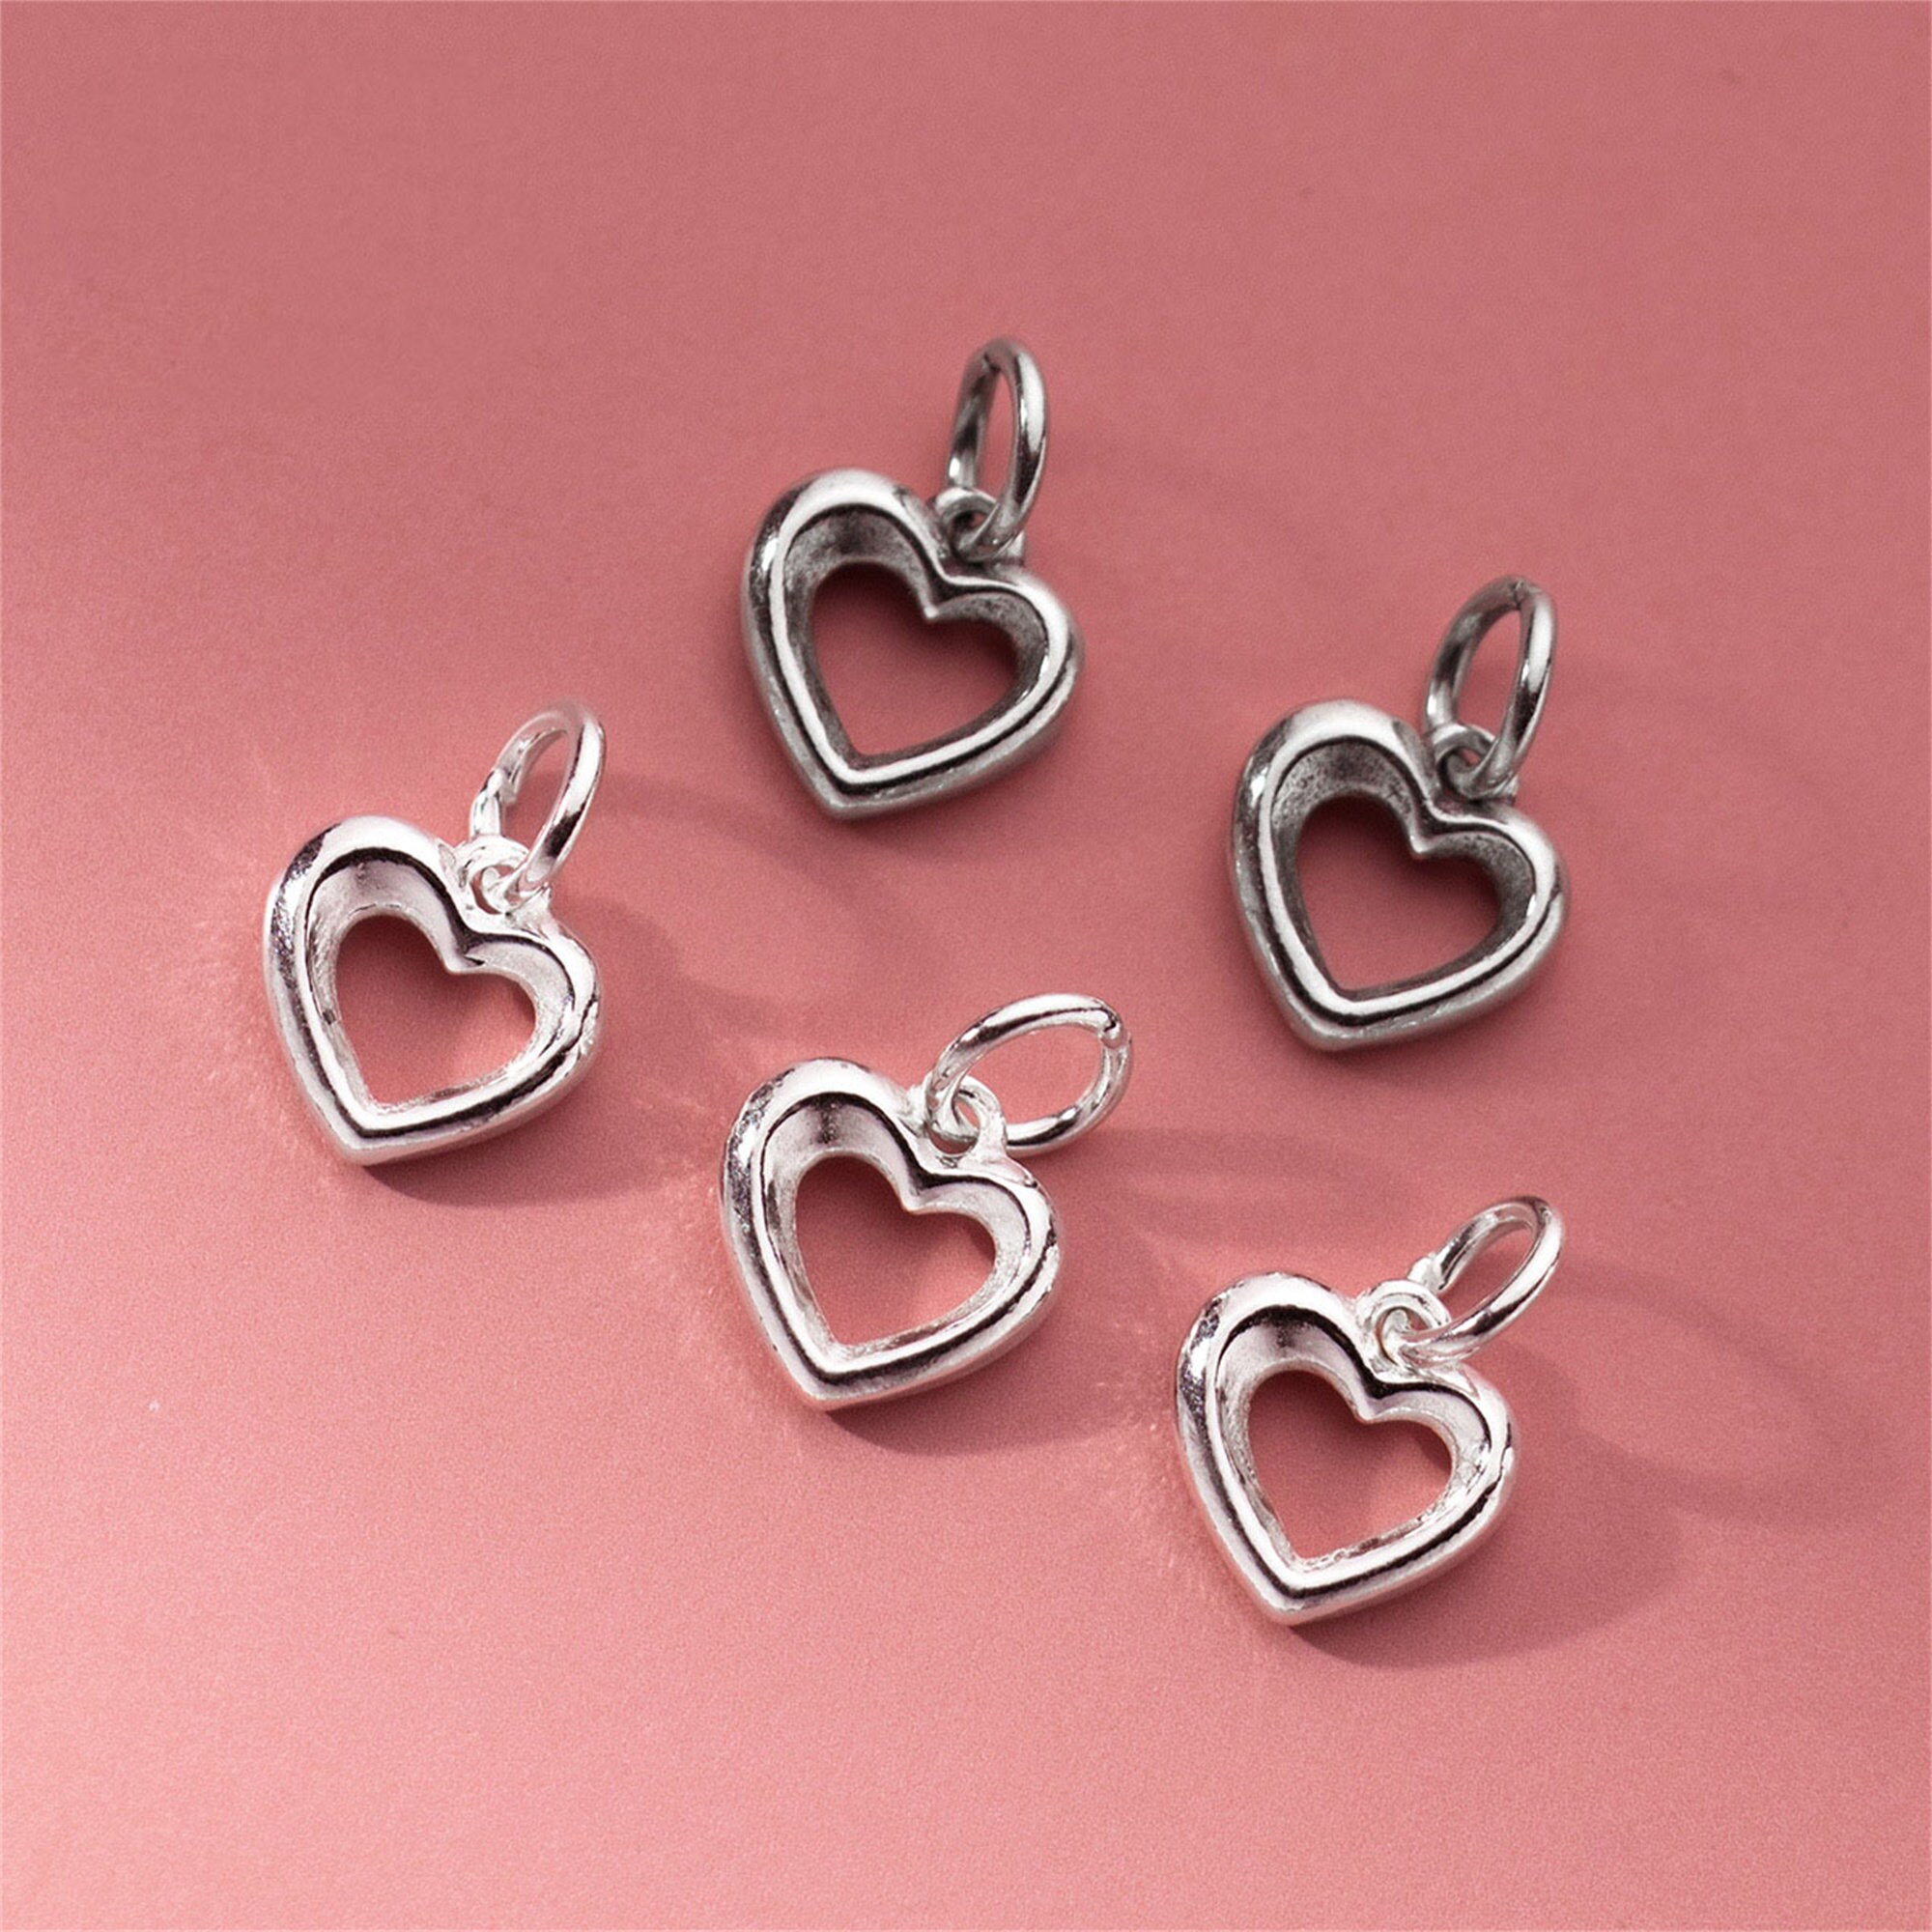 80pcs Charms 13x9mm Hollow Heart Charms For Jewelry Making DIY